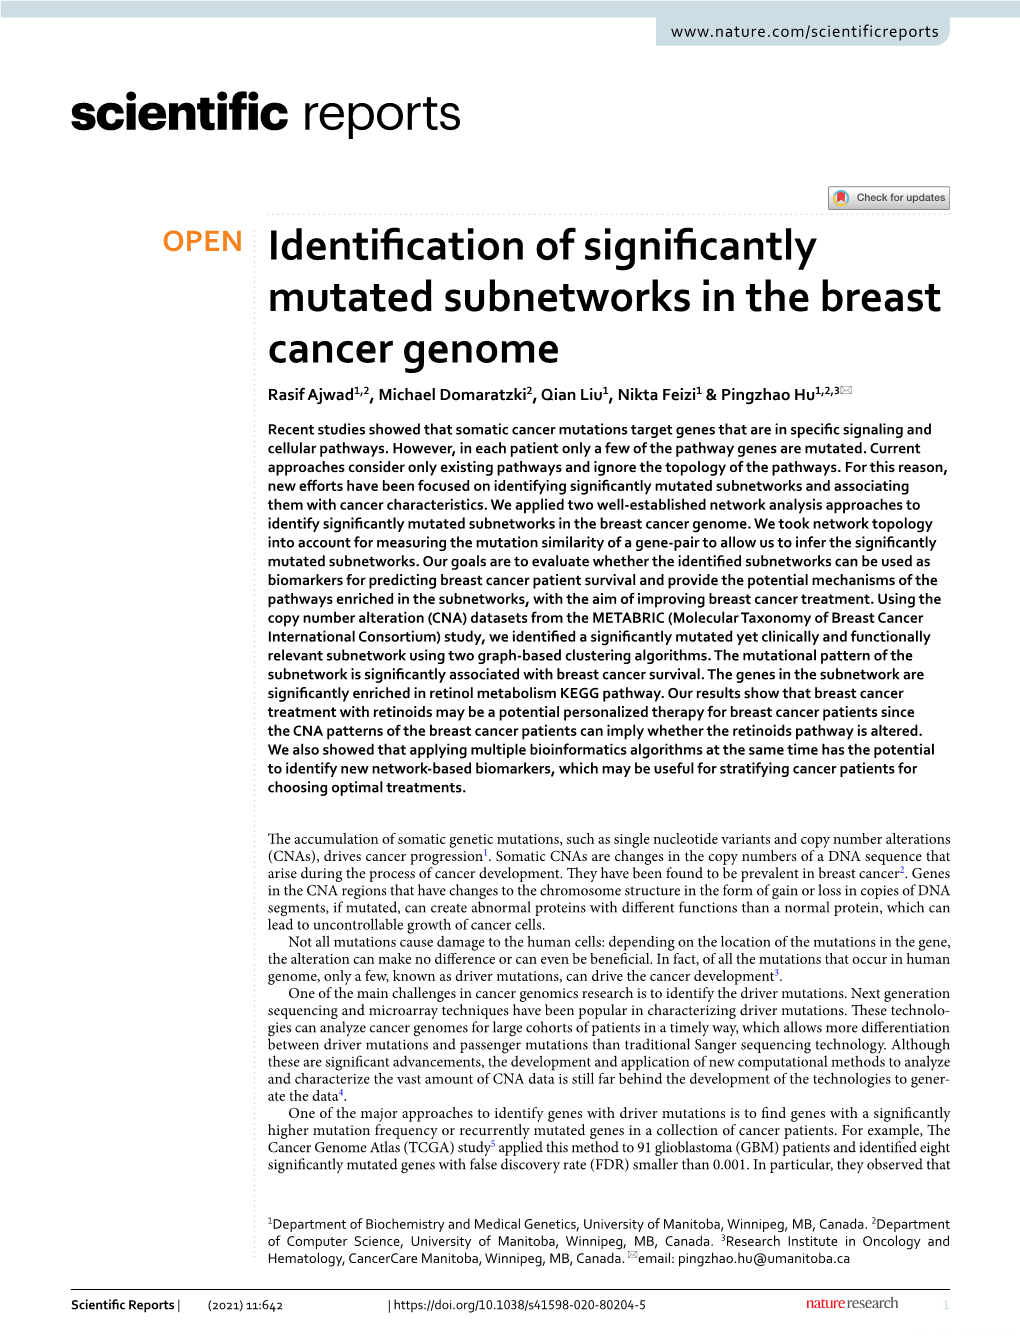 Identification of Significantly Mutated Subnetworks in the Breast Cancer Genome